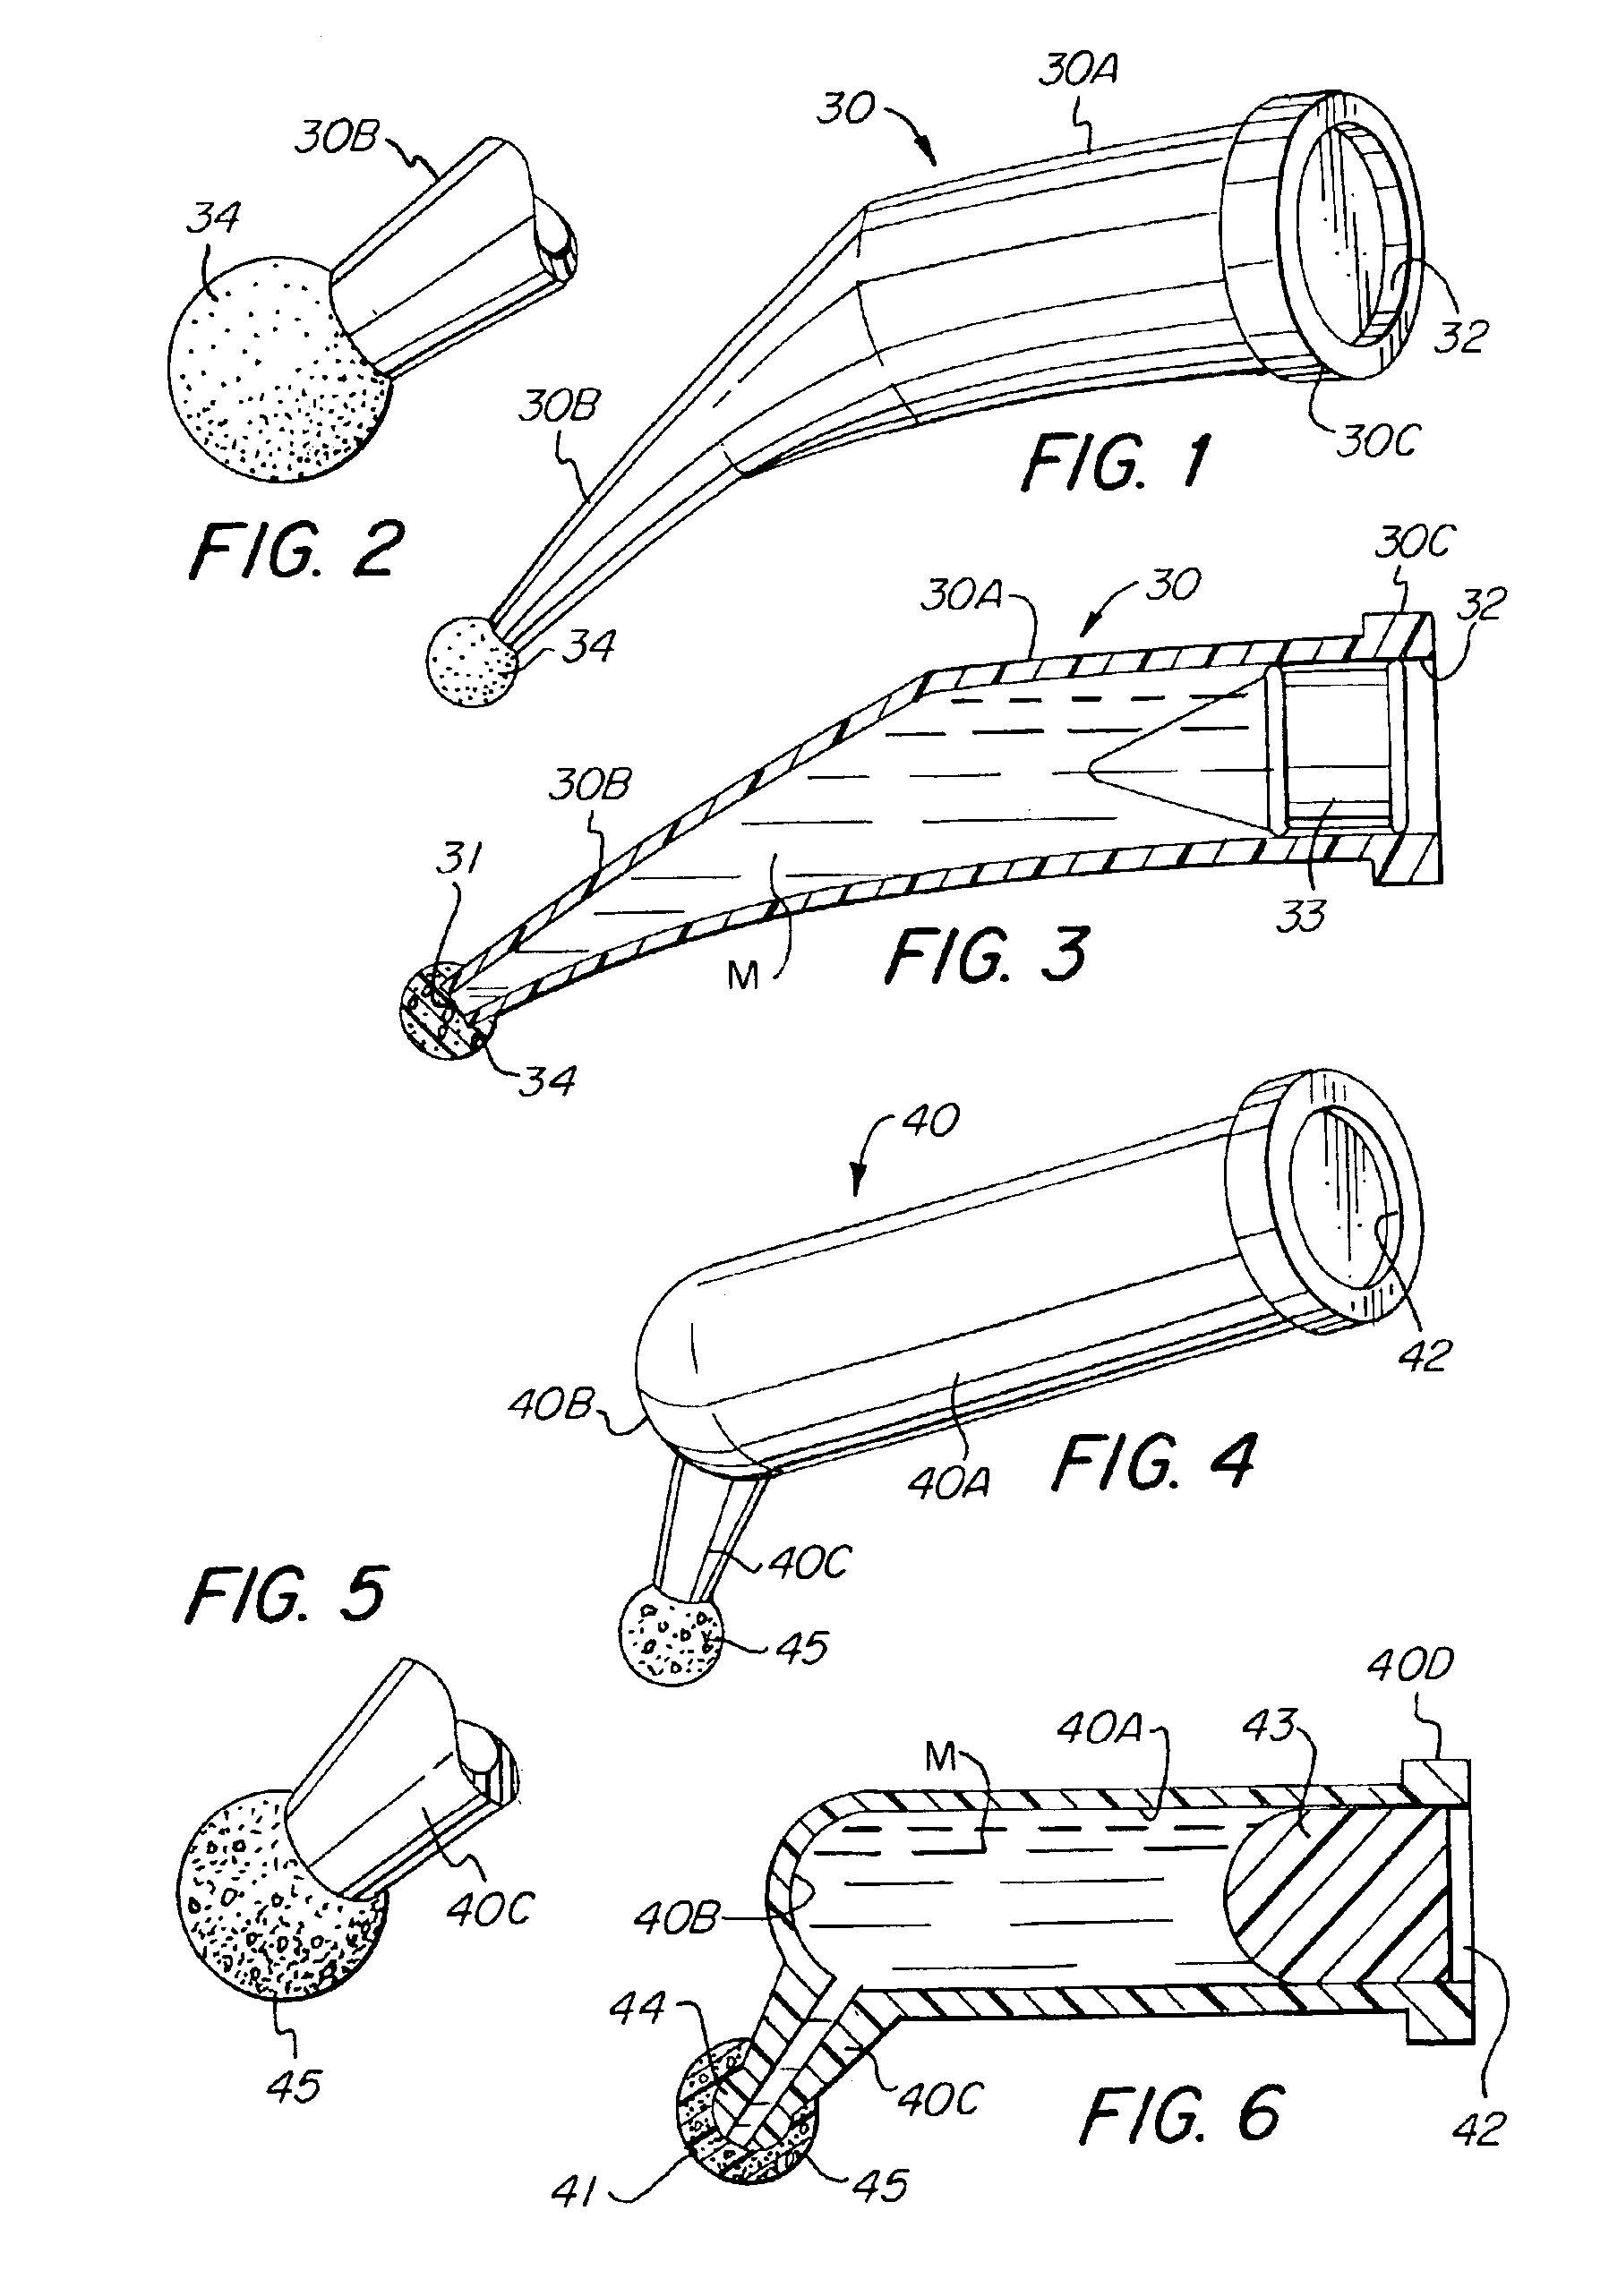 Dental material container with porous flow through applicator